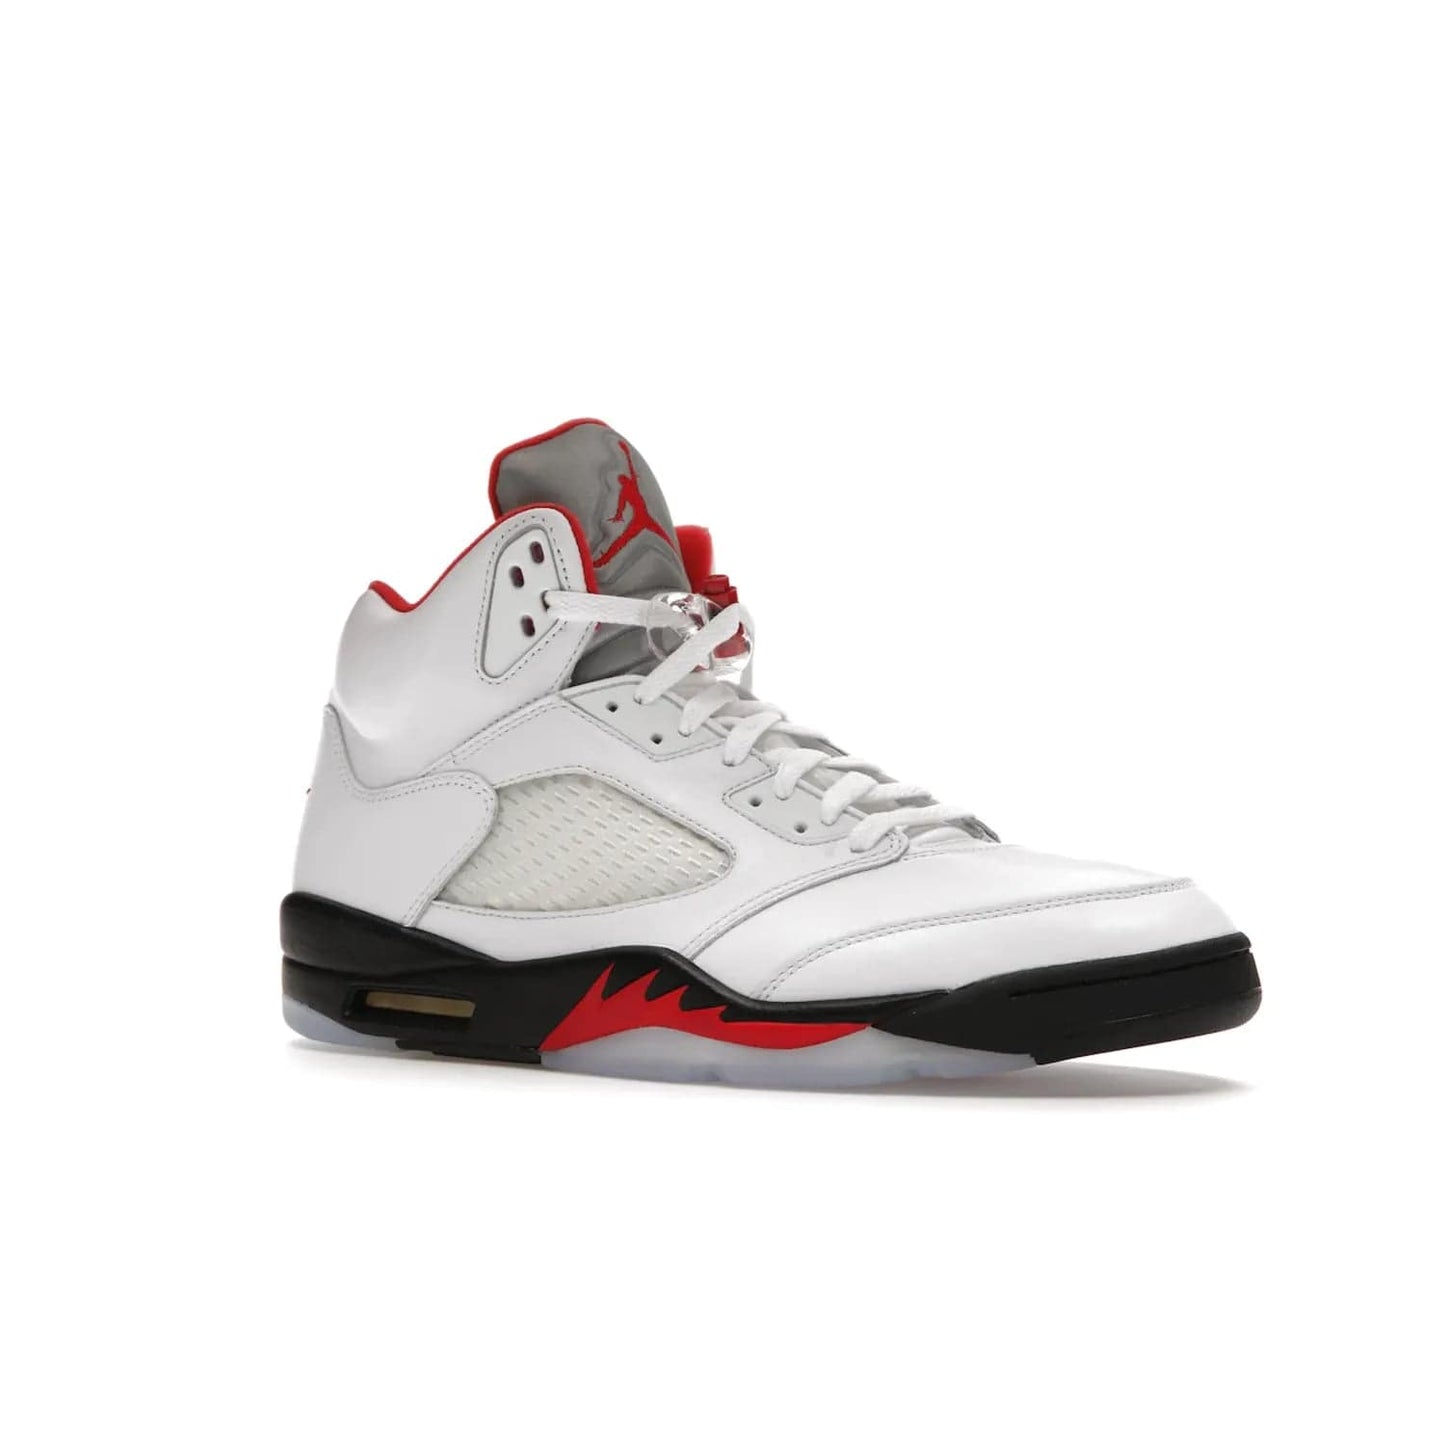 Jordan 5 Retro Fire Red Silver Tongue (2020) - Image 4 - Only at www.BallersClubKickz.com - Experience classic styling with the Jordan 5 Retro Fire Red Silver Tongue (2020). Features a white leather upper, 3M reflective tongue, midsole colorblocking, and an icy translucent outsole. Now available, upgrade your shoe collection today.